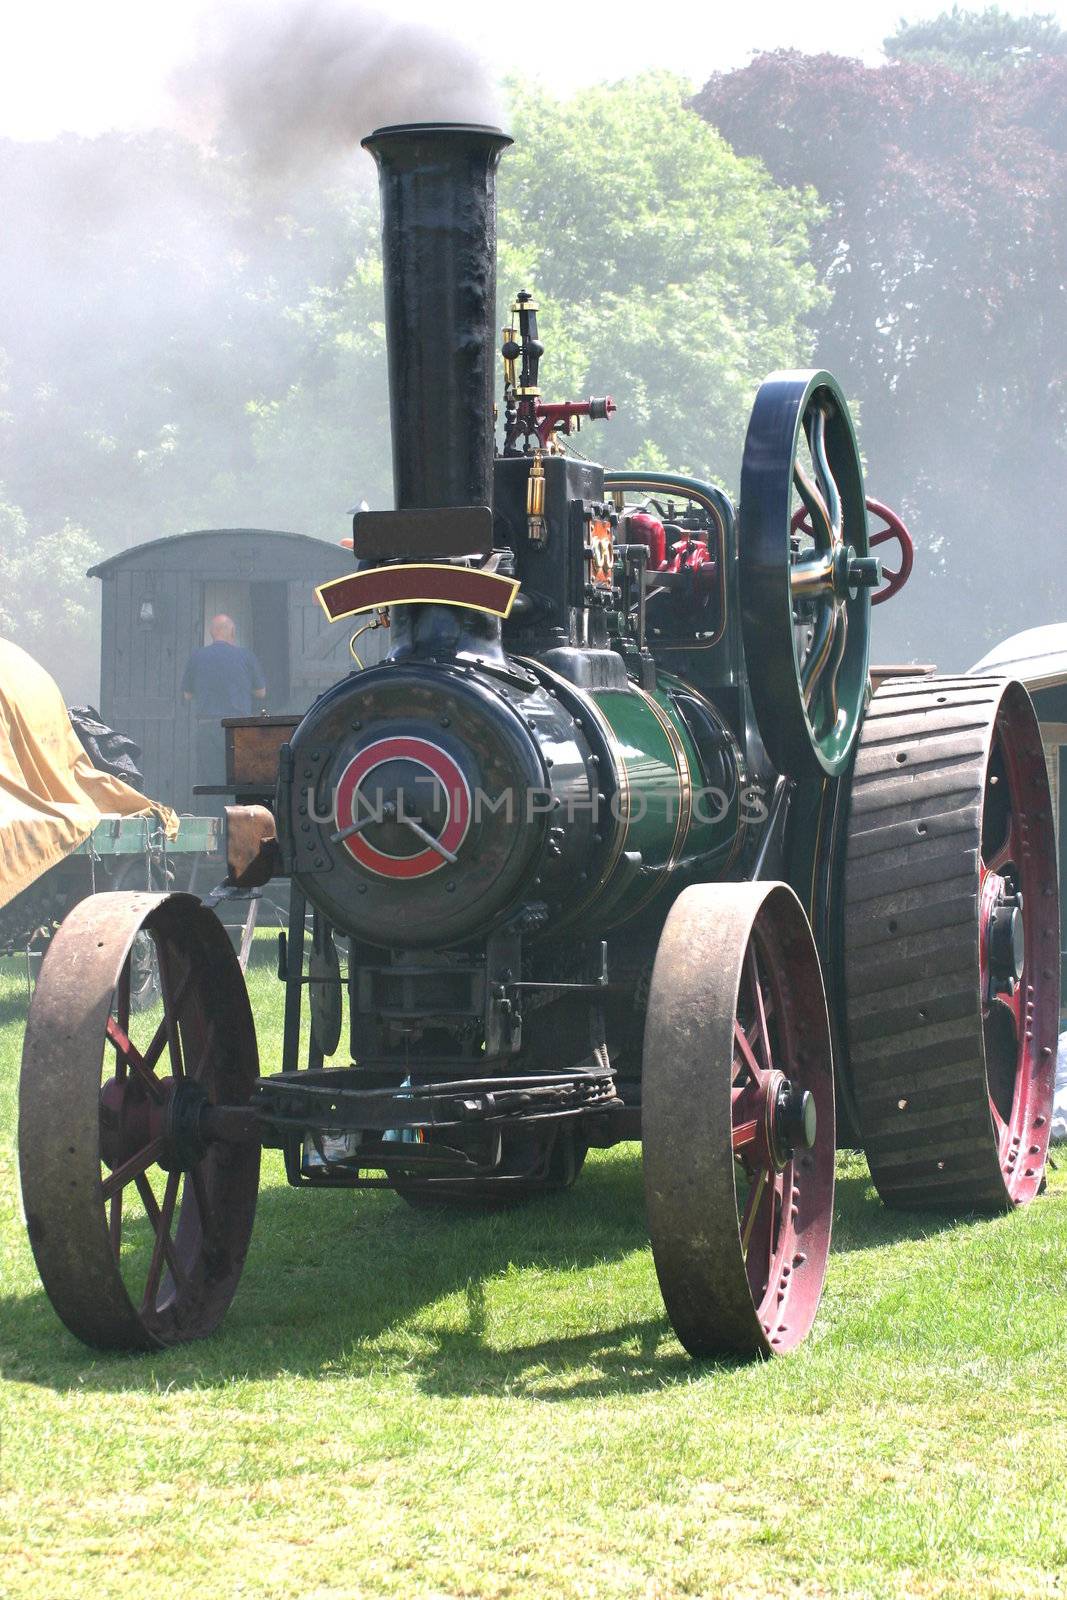 traction steam engine by leafy